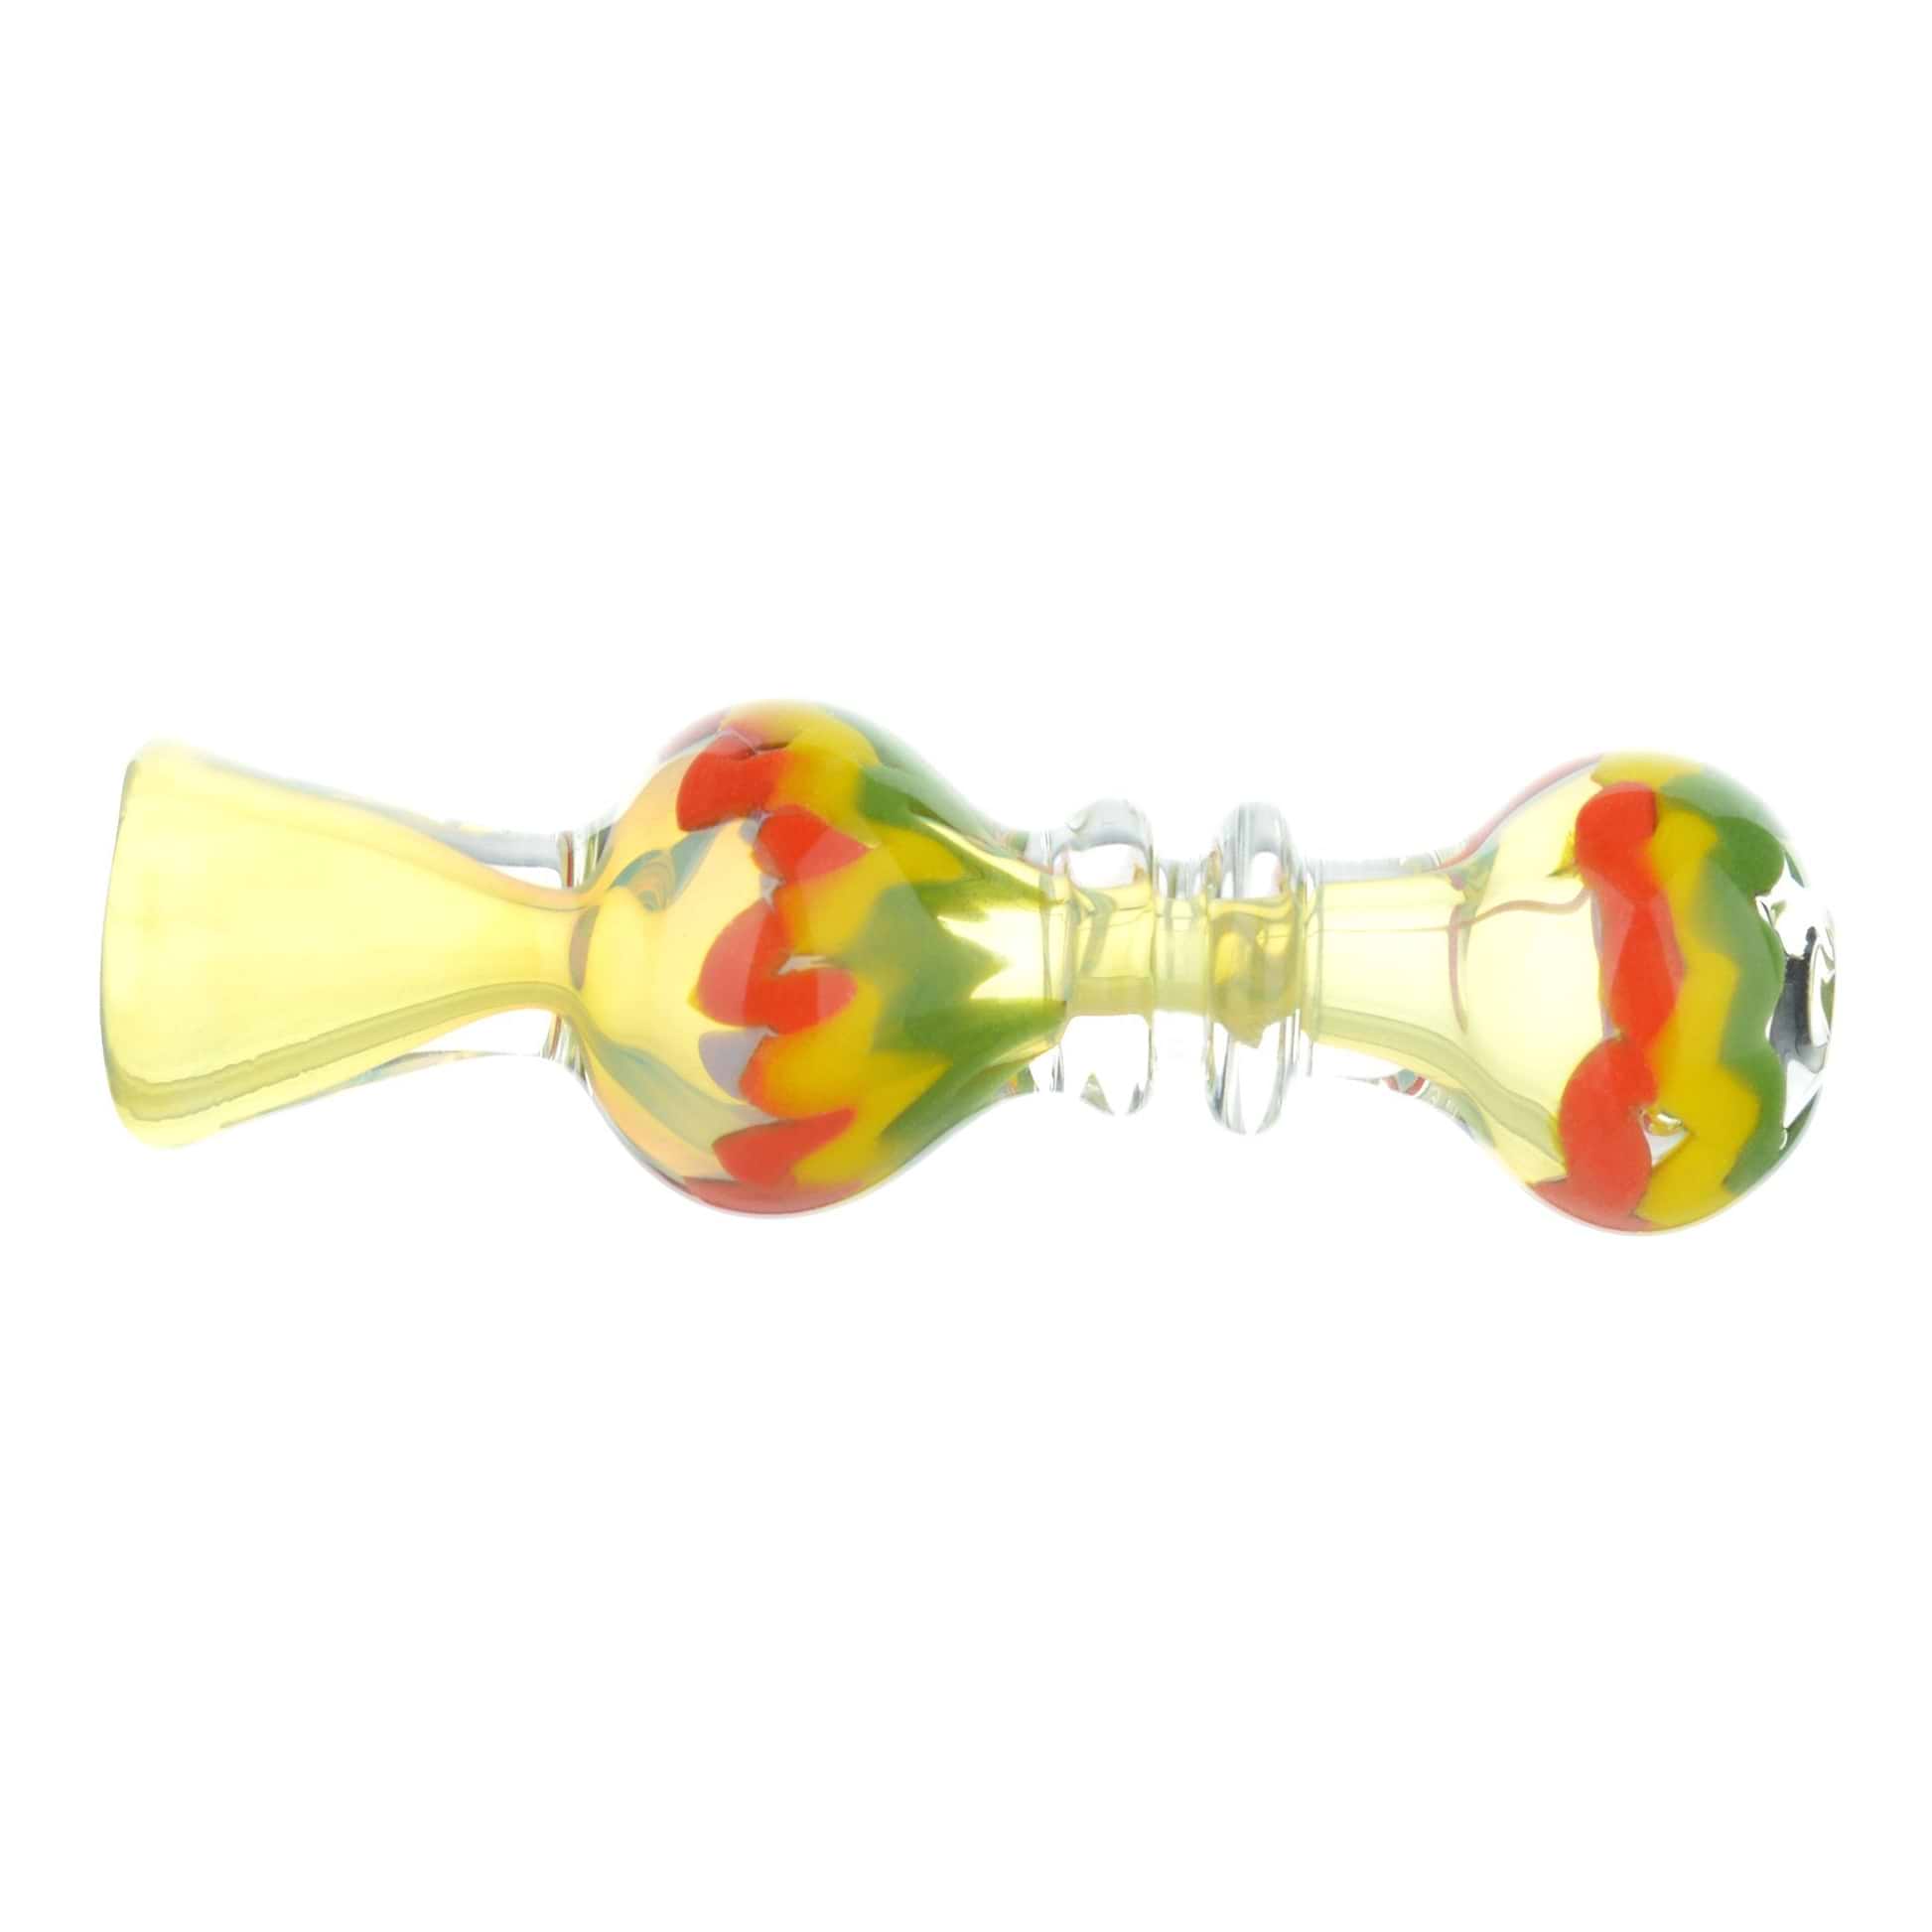 Full shot of rasta-themed glass oney smoking device in red, yellow and green color swirls mouthpiece on left